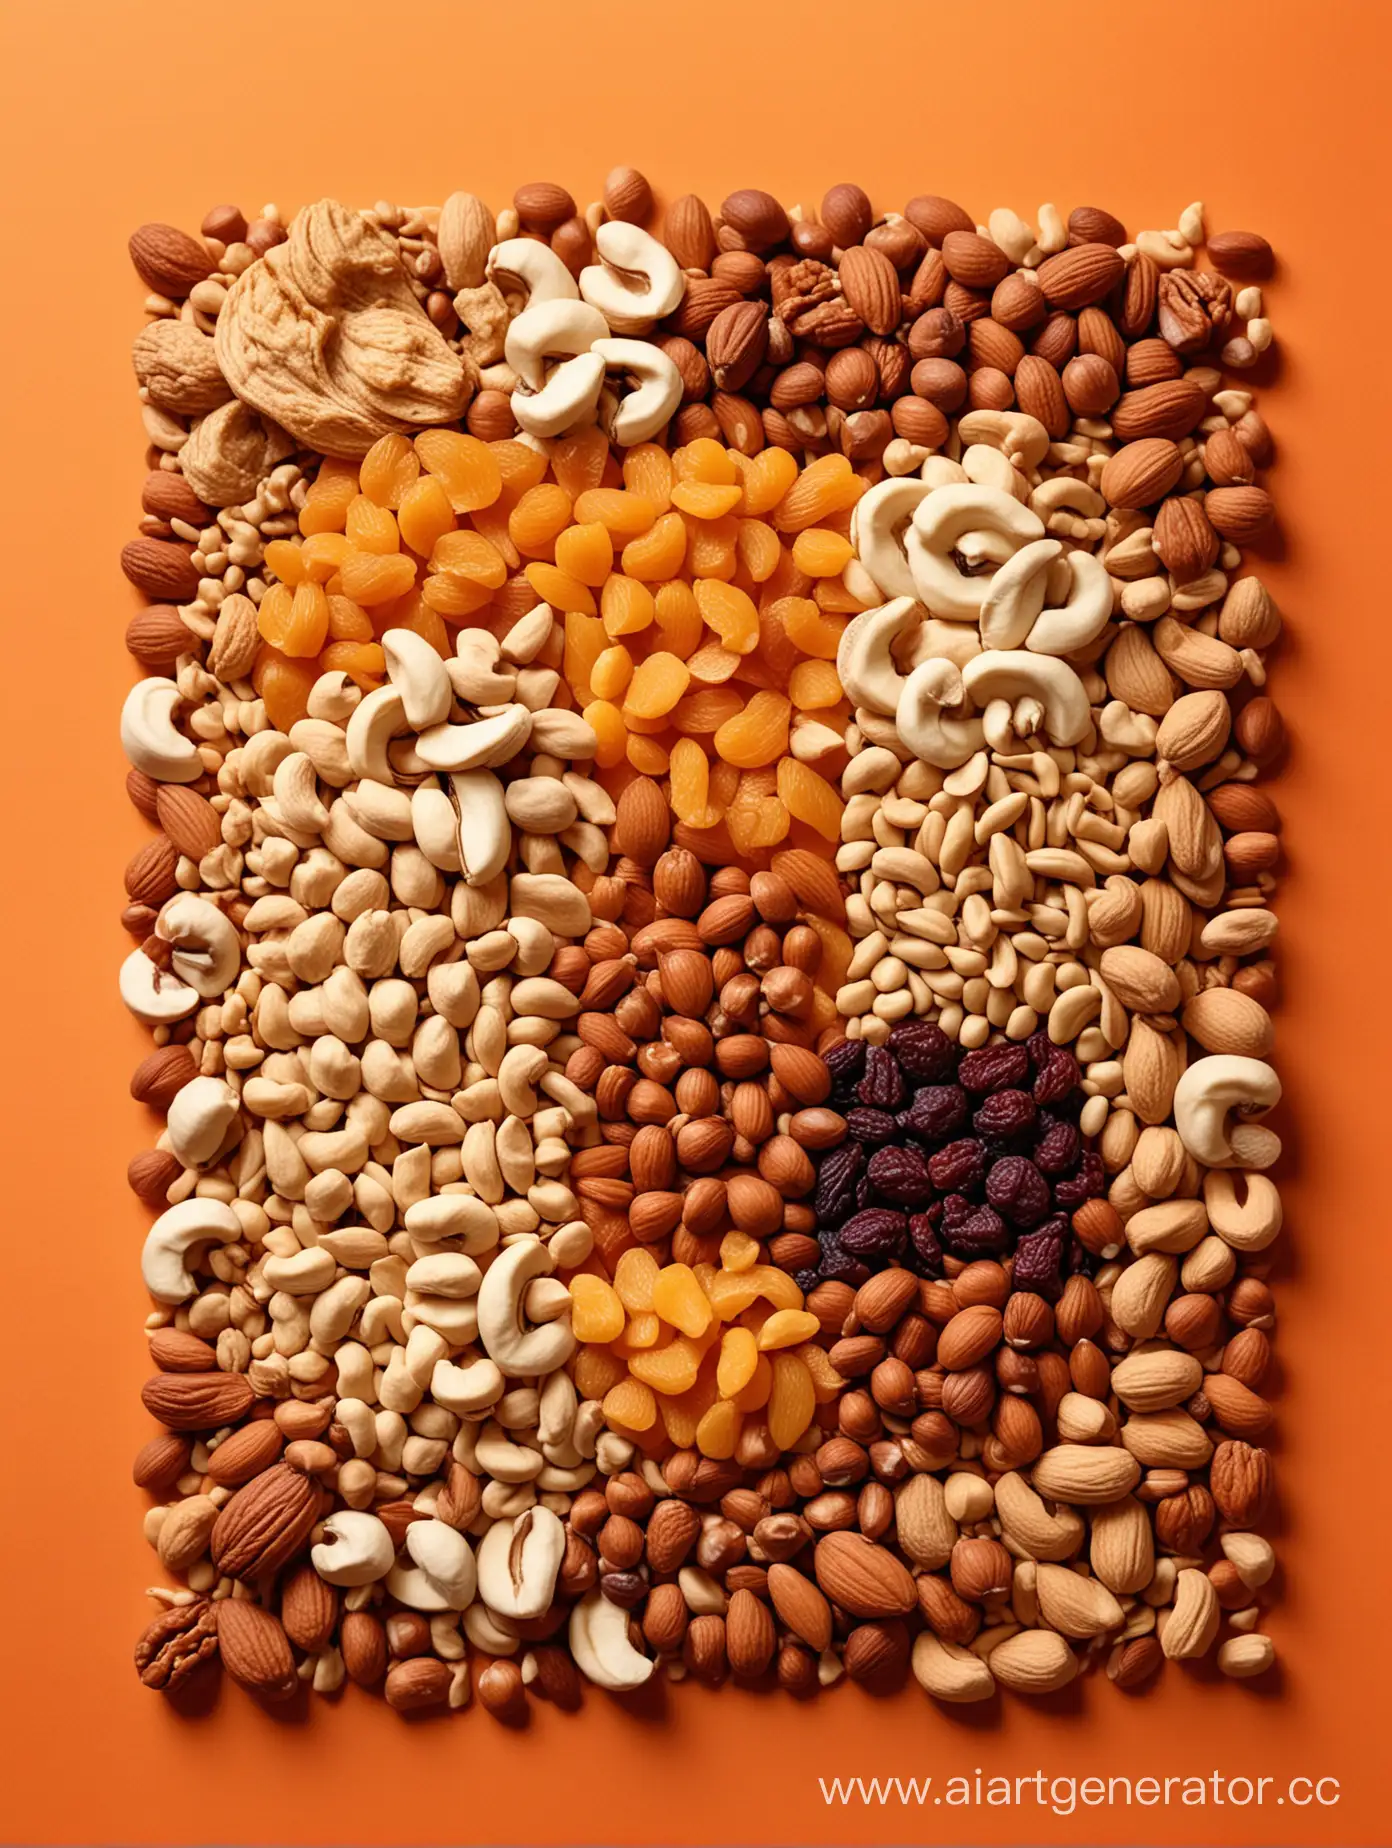 Colorful-Nuts-and-Dried-Fruits-Display-Vibrant-Array-on-Orange-Gradient